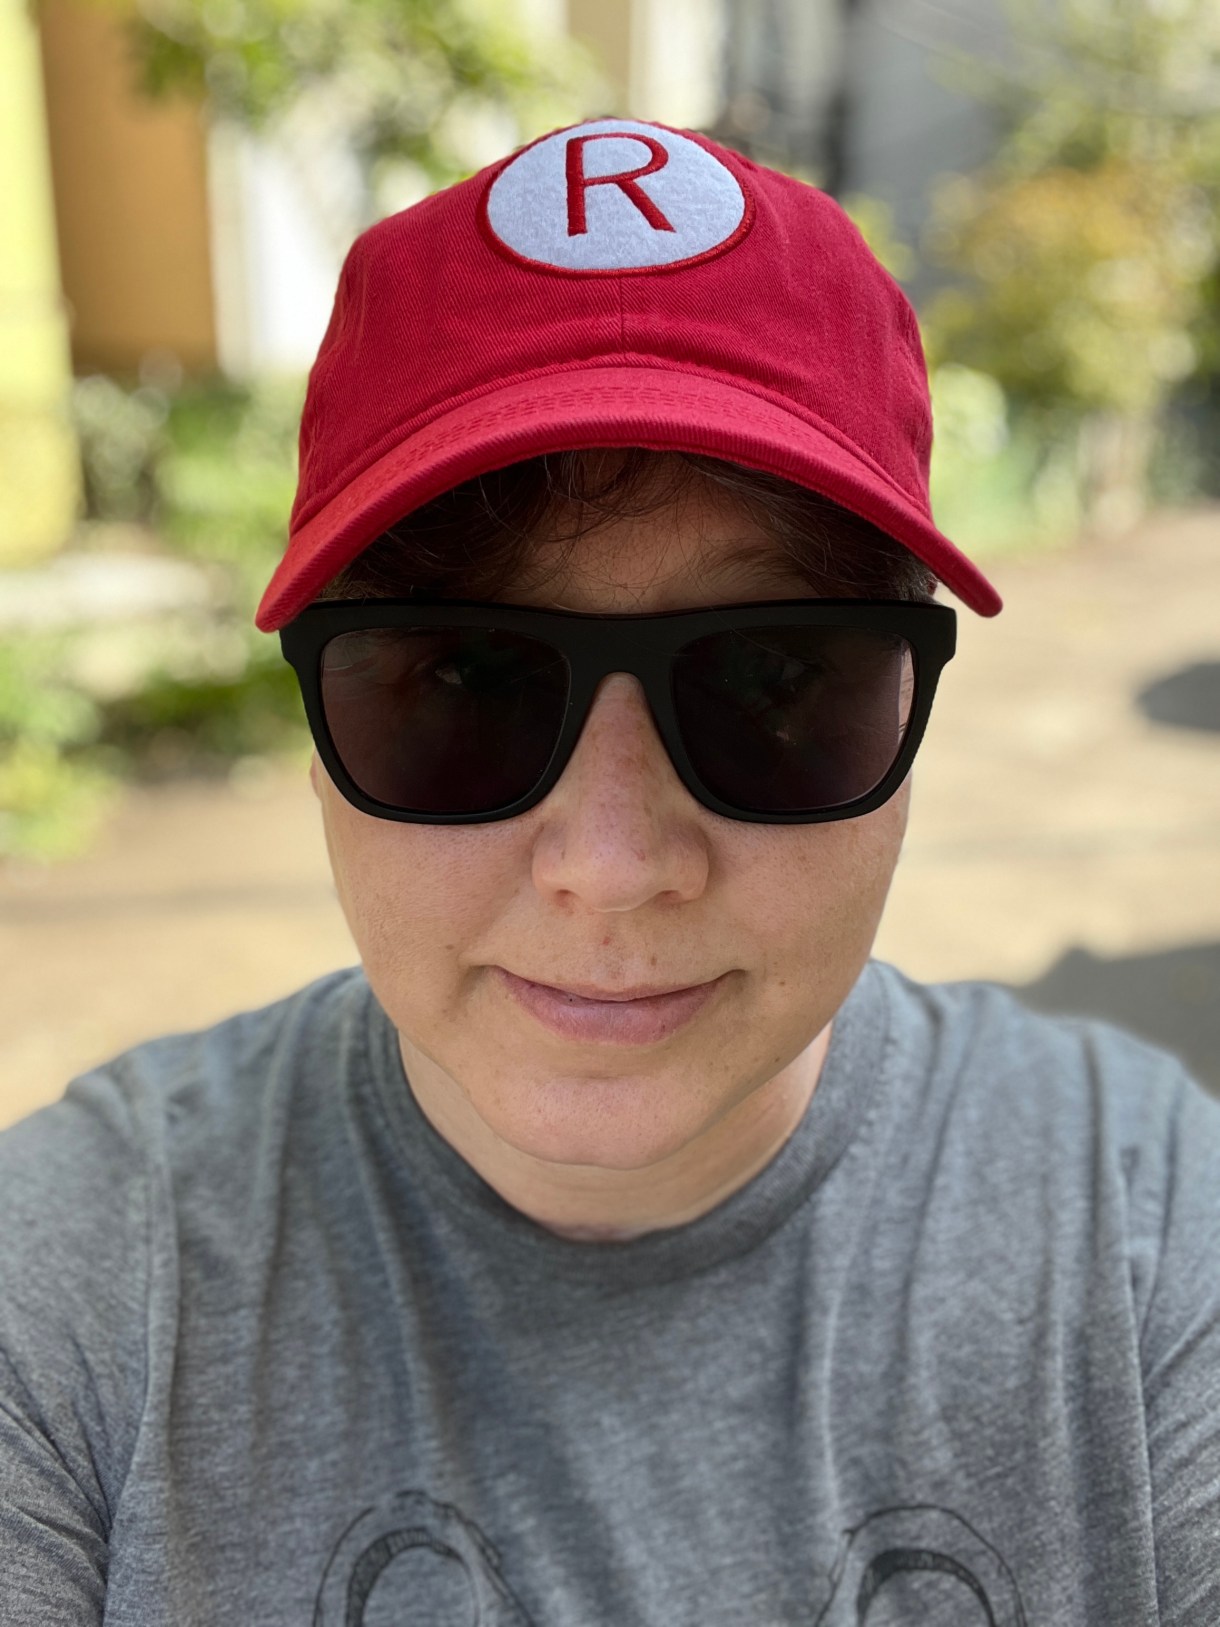 Heather takes a selfie outside in the sun, wearing a basebal cap with an R on it, sunglasses and a gray tee shirt. Heather is white and you cannot see her hair whichis all tucked under her hat in this photo